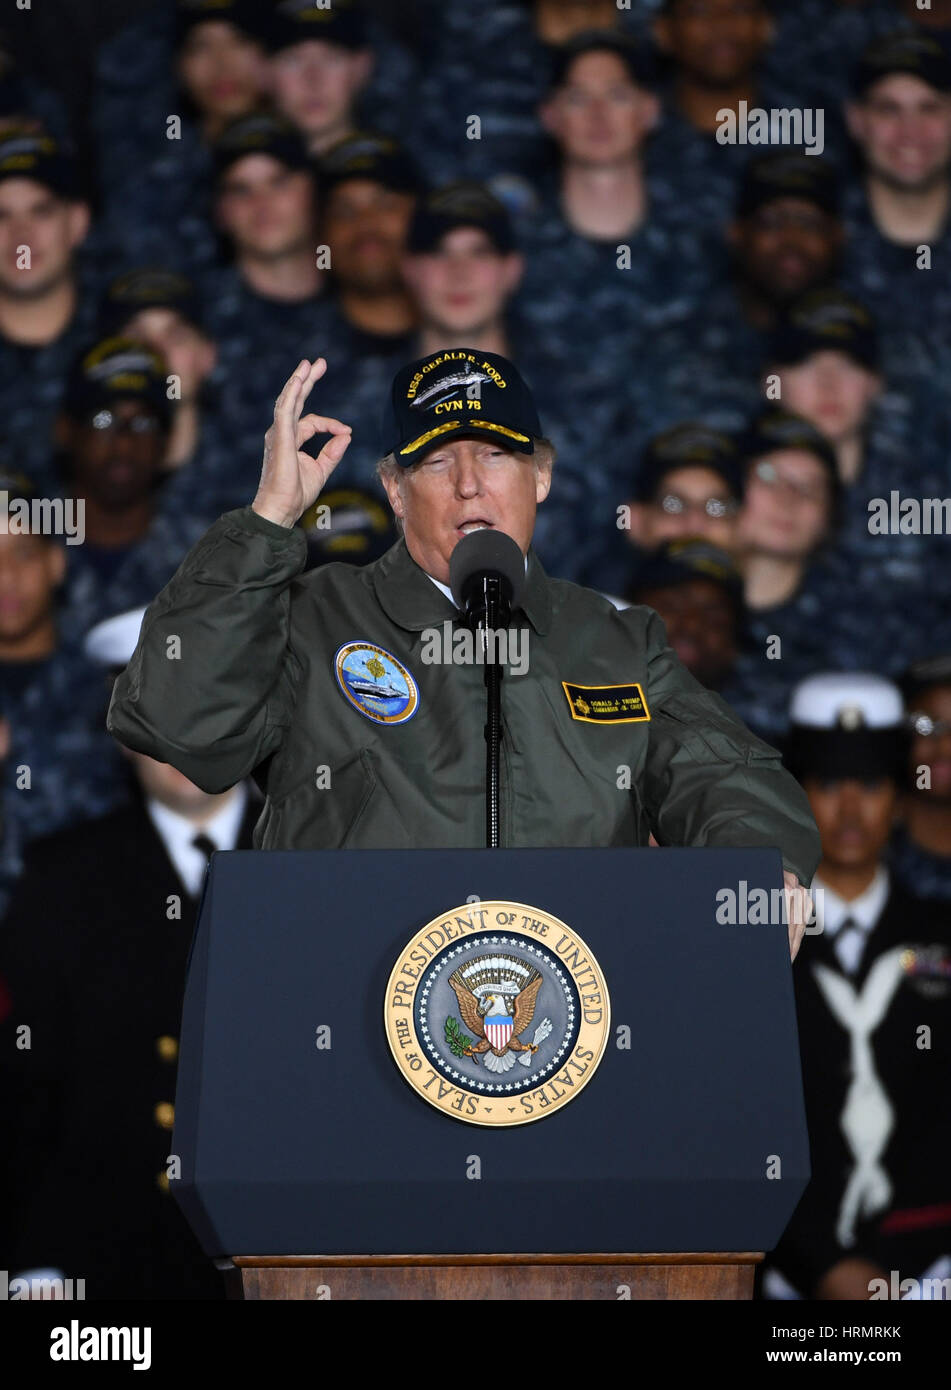 Newport News, USA. 2nd Mar, 2017. U.S. President Donald Trump delivers remarks aboard the pre-commissioned U.S. Navy aircraft carrier Gerald R. Ford in Newport News, Virginia, the United States, March 2, 2017. Credit: Yin Bogu/Xinhua/Alamy Live News Stock Photo